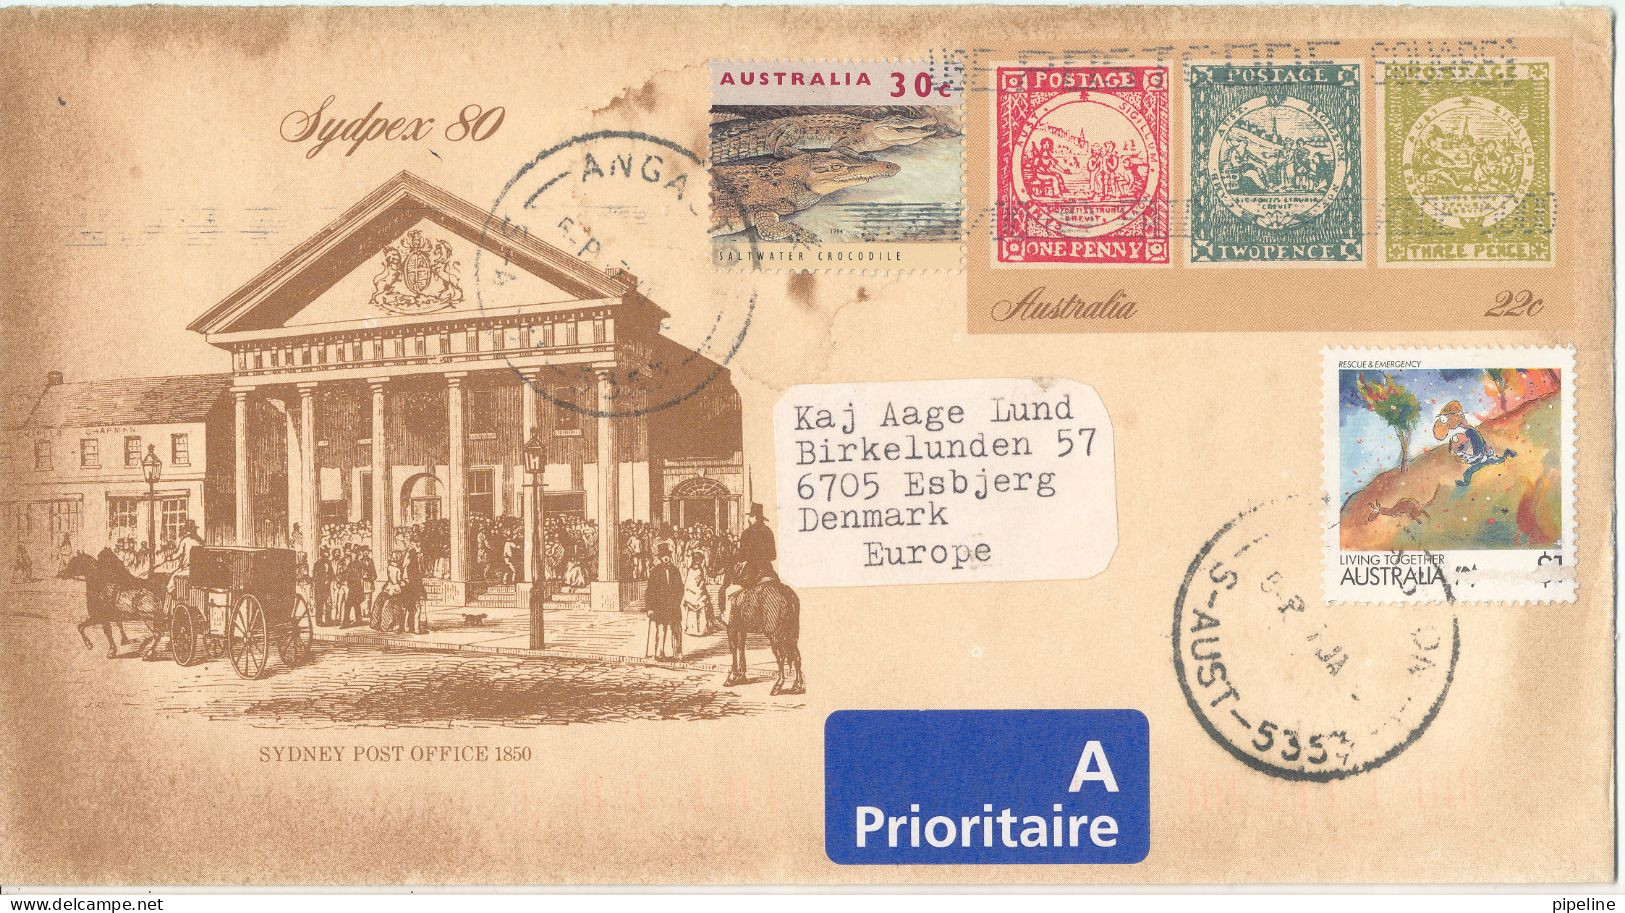 Australia Uprated Postal Stationery Cover SYDPEX 80 Sent To Denmark - Entiers Postaux